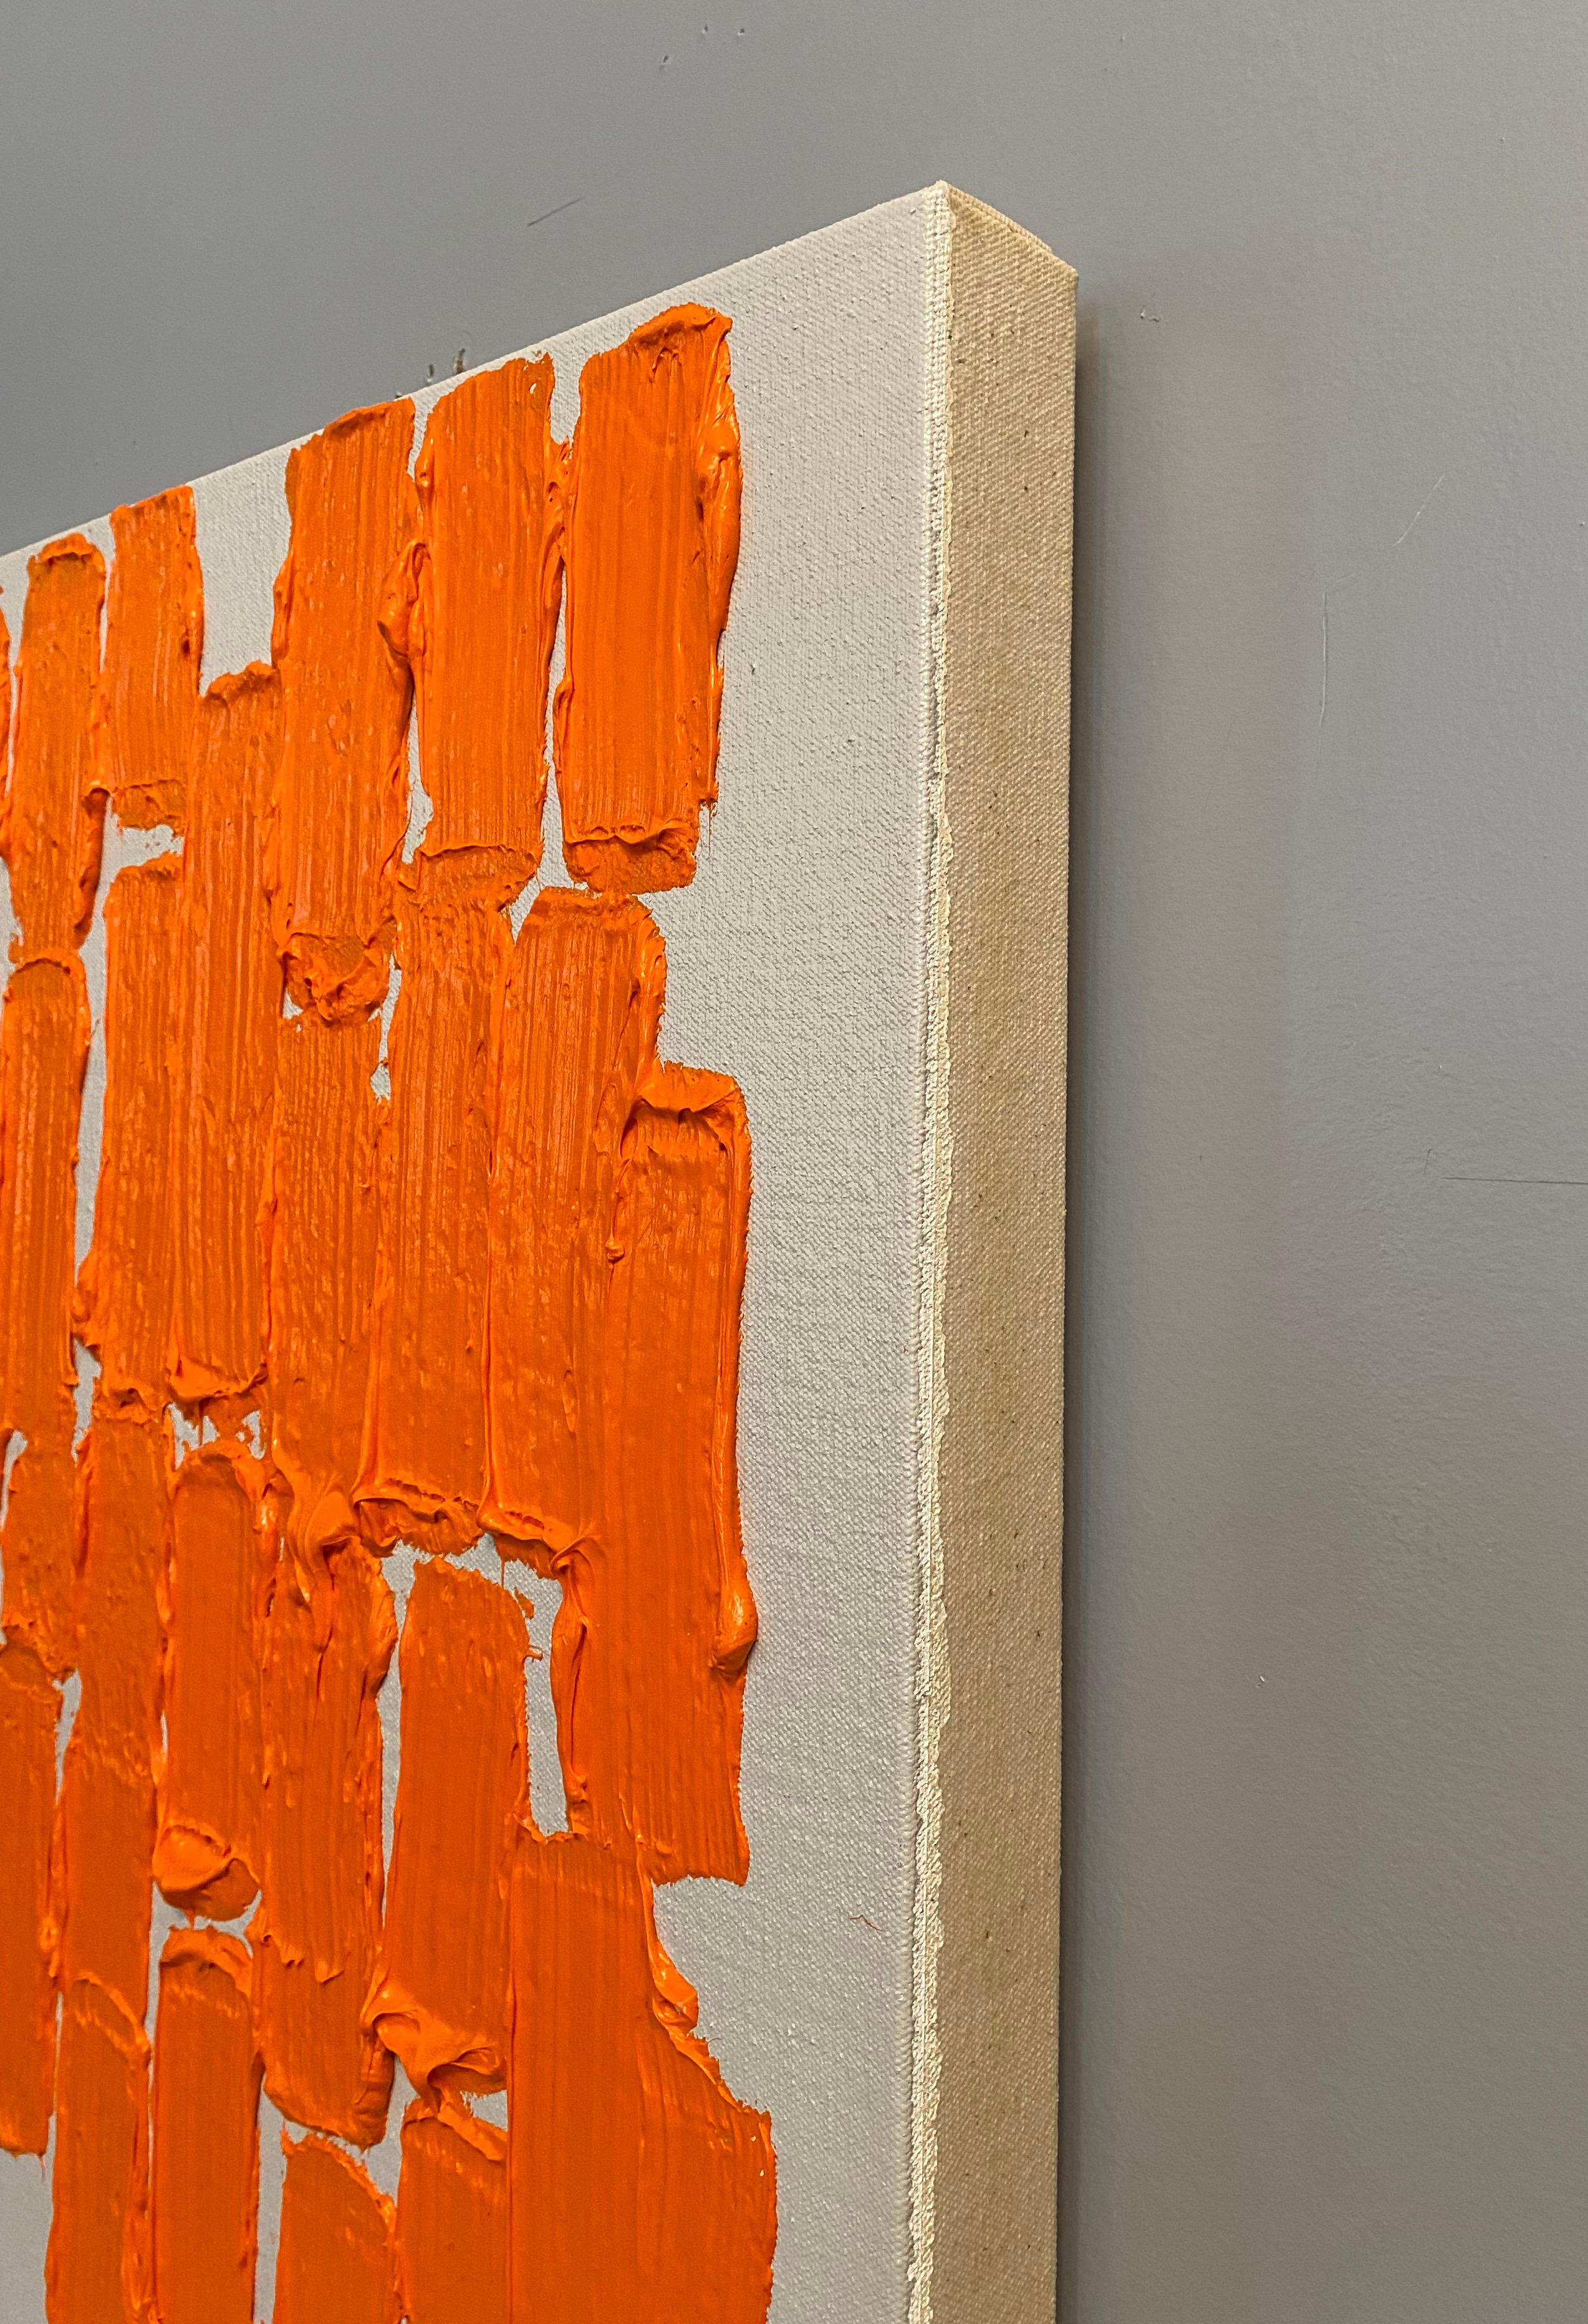 Visible Things, abstraction in Orange - Abstract Painting by John Zinsser